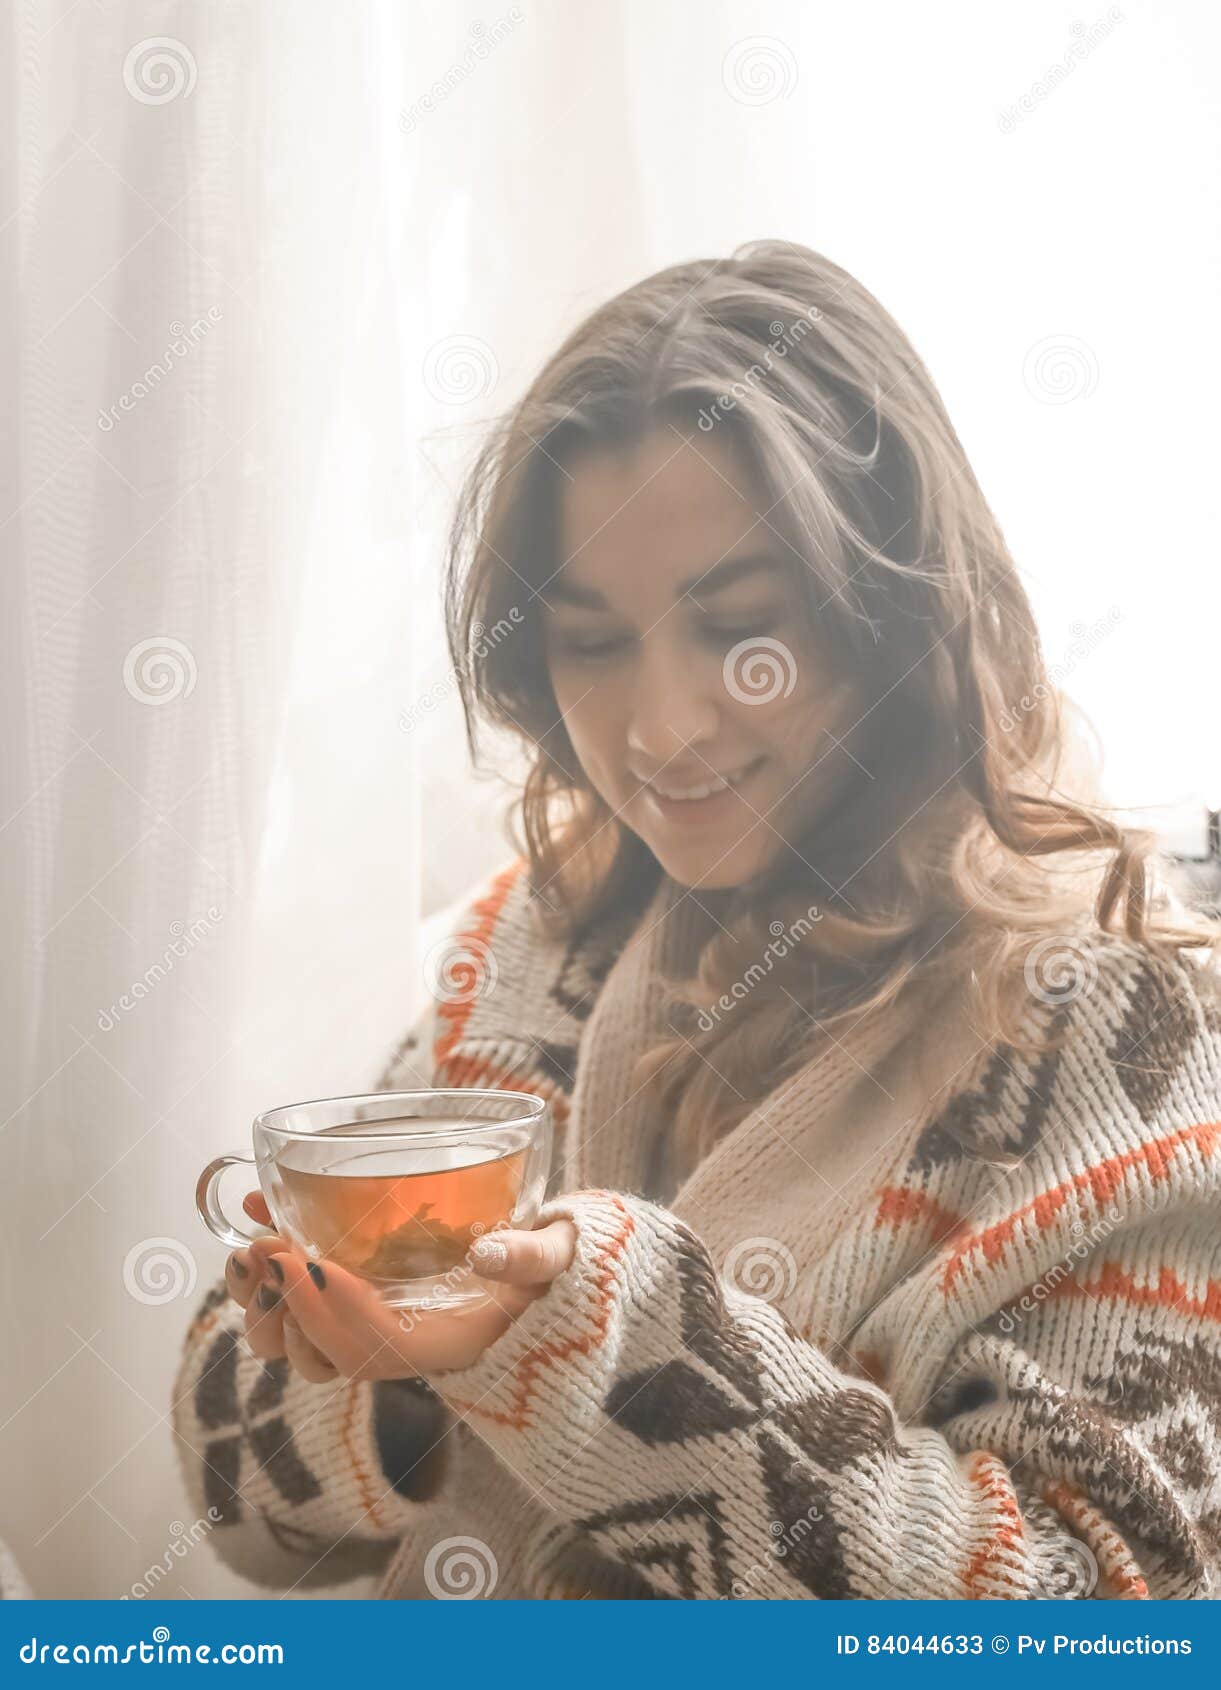 Cozy Cup of Tea the Girl in the Hands Stock Image - Image of rustic ...